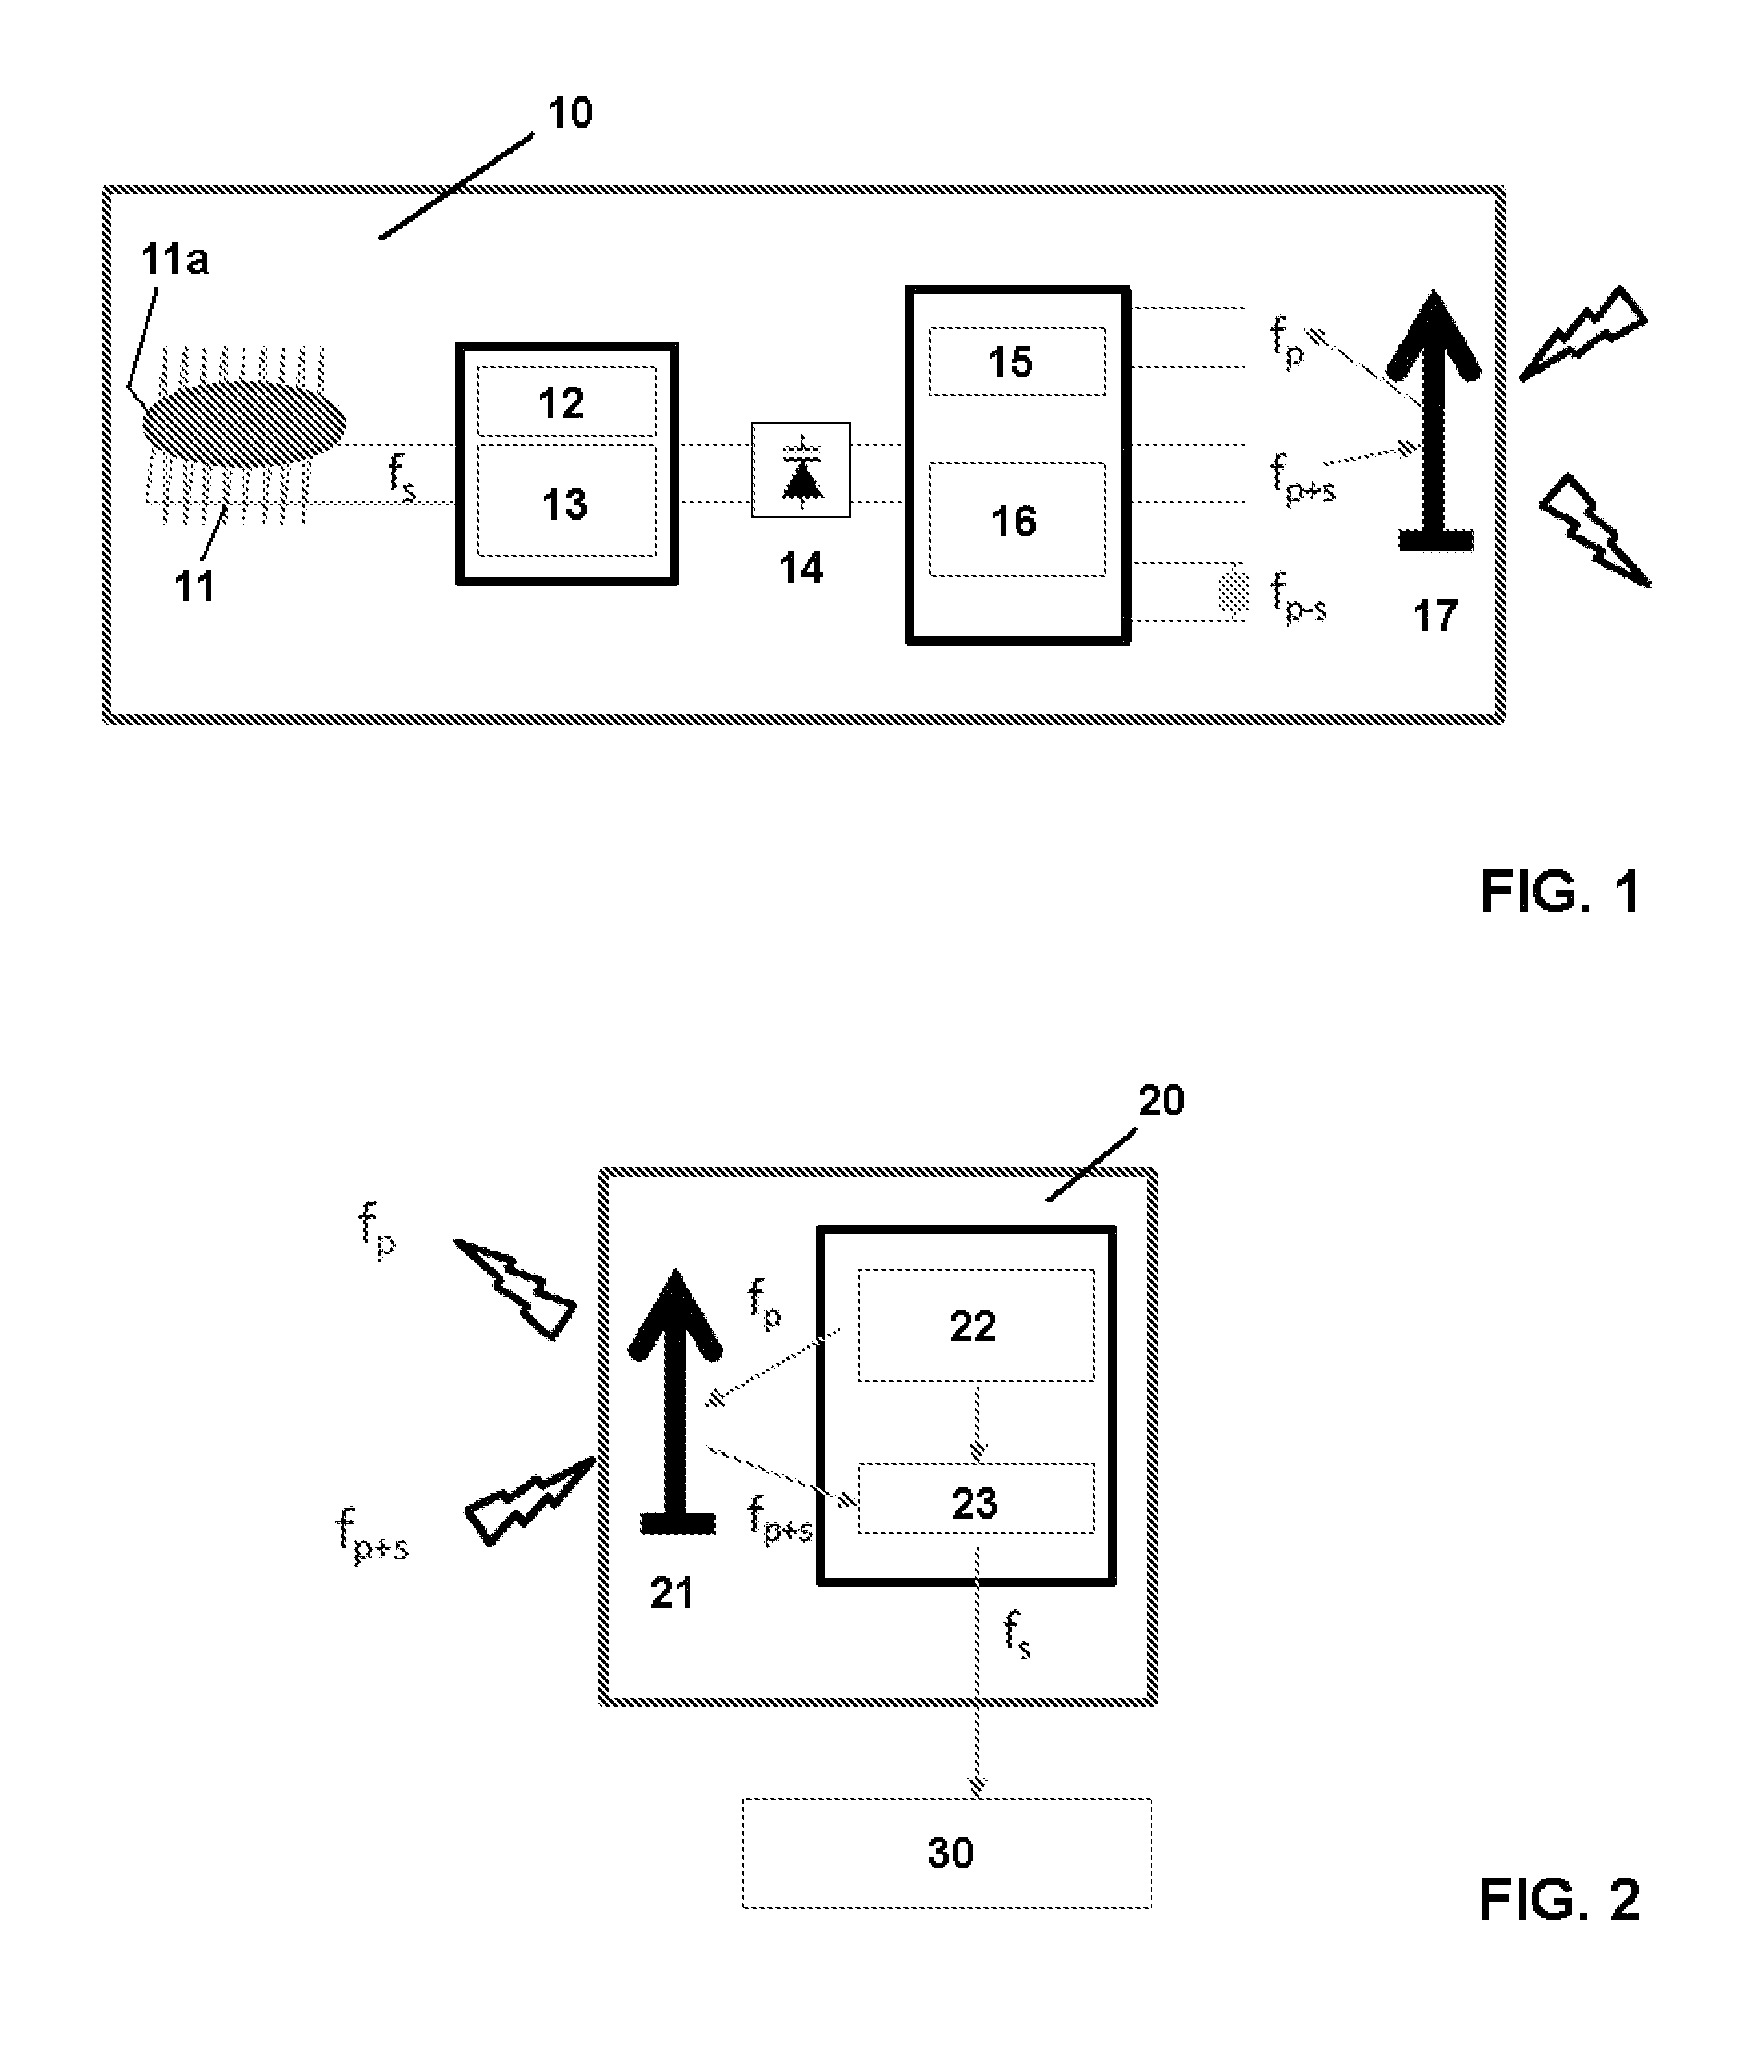 Active position marker system for use in an MRI apparatus